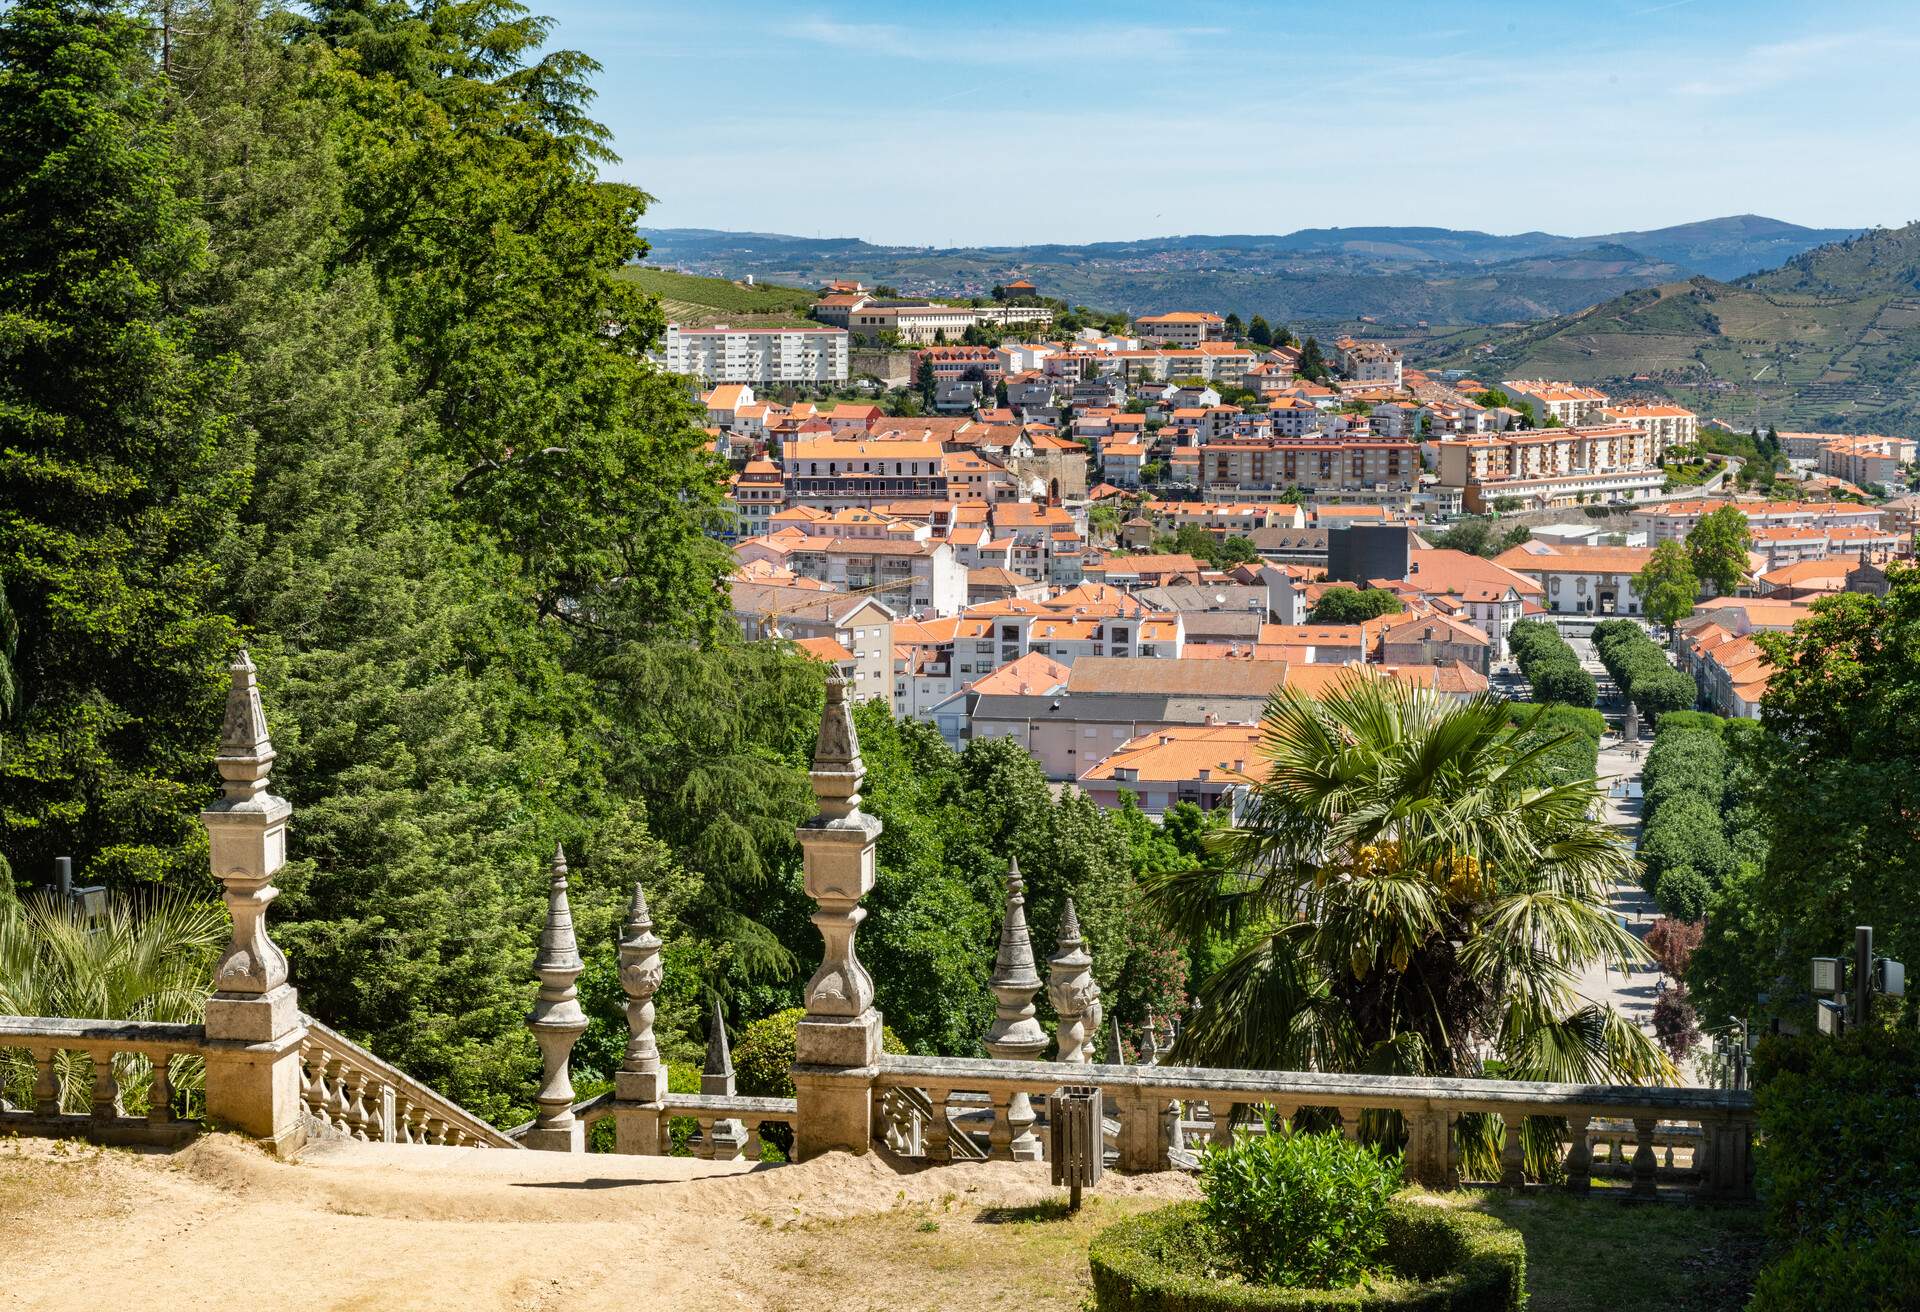 View at the stairway to Sanctuary of Our Lady of Remedios in Lamego - Portugal